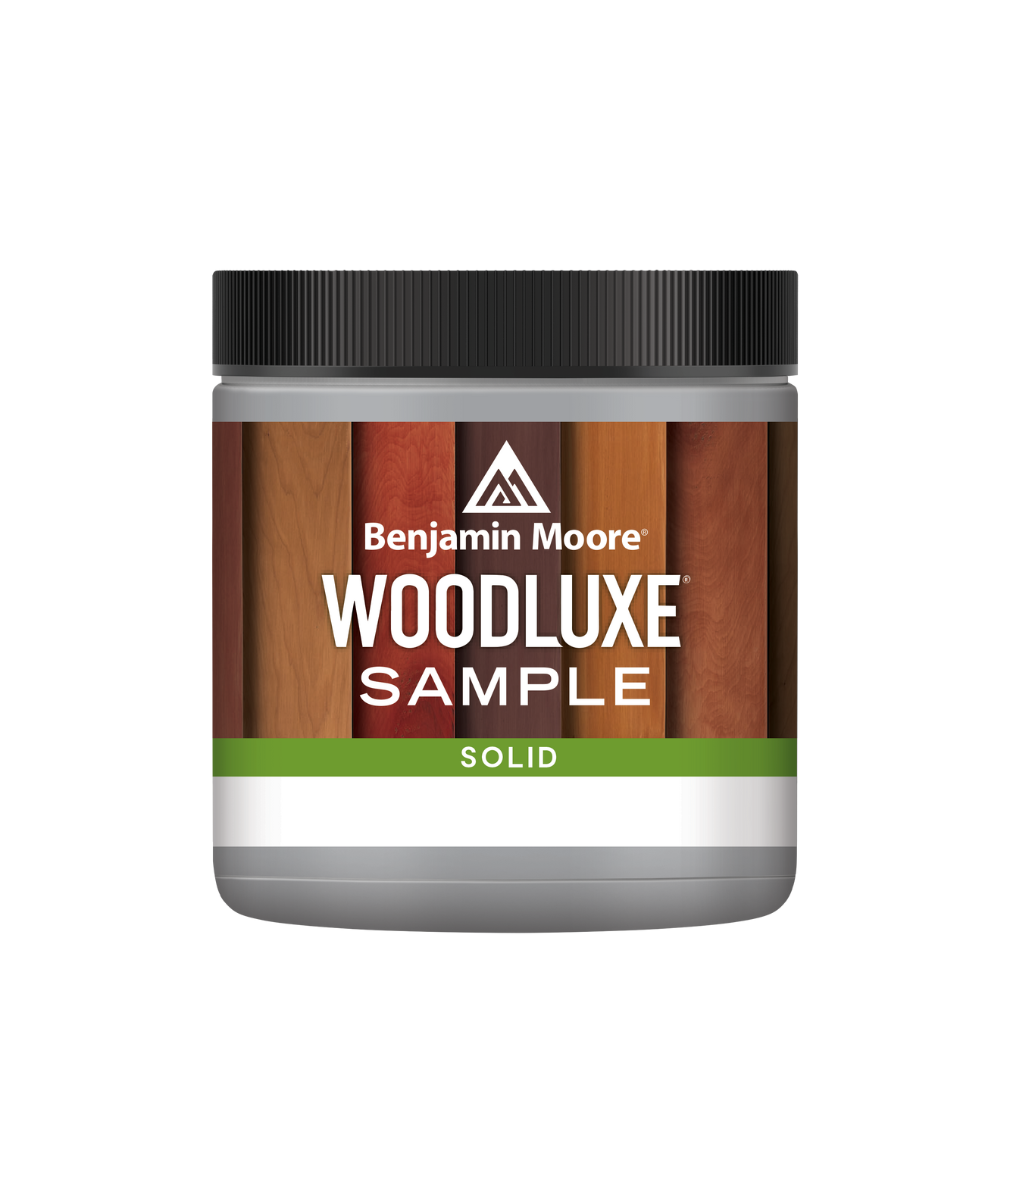 Benjamin Moore Woodluxe® Water-Based Solid Exterior Stain Half-Pint available at JC Licht.